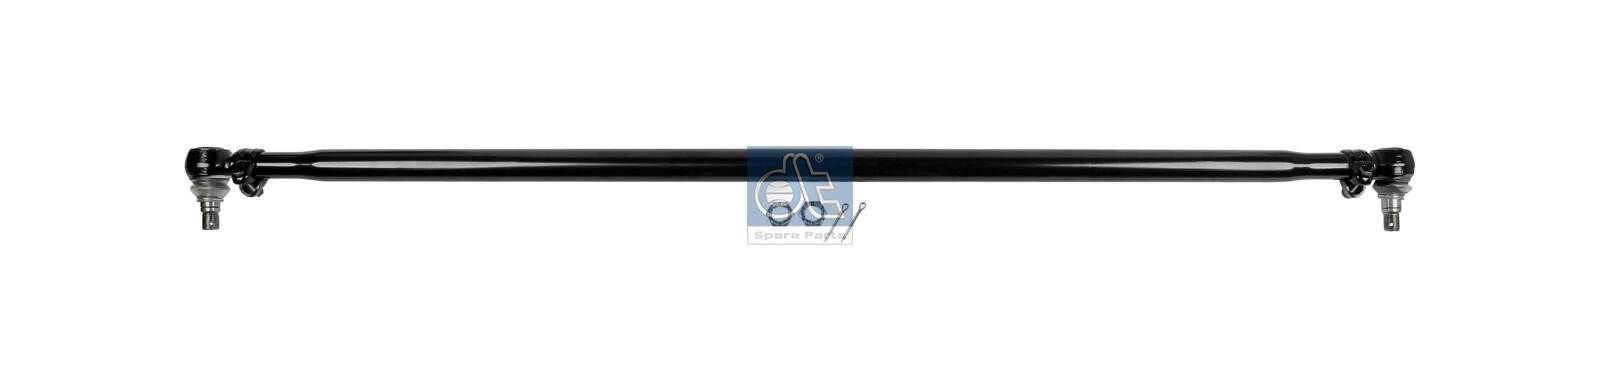 DT Spare Parts 6.53009 Rod Assembly 5010 308 082